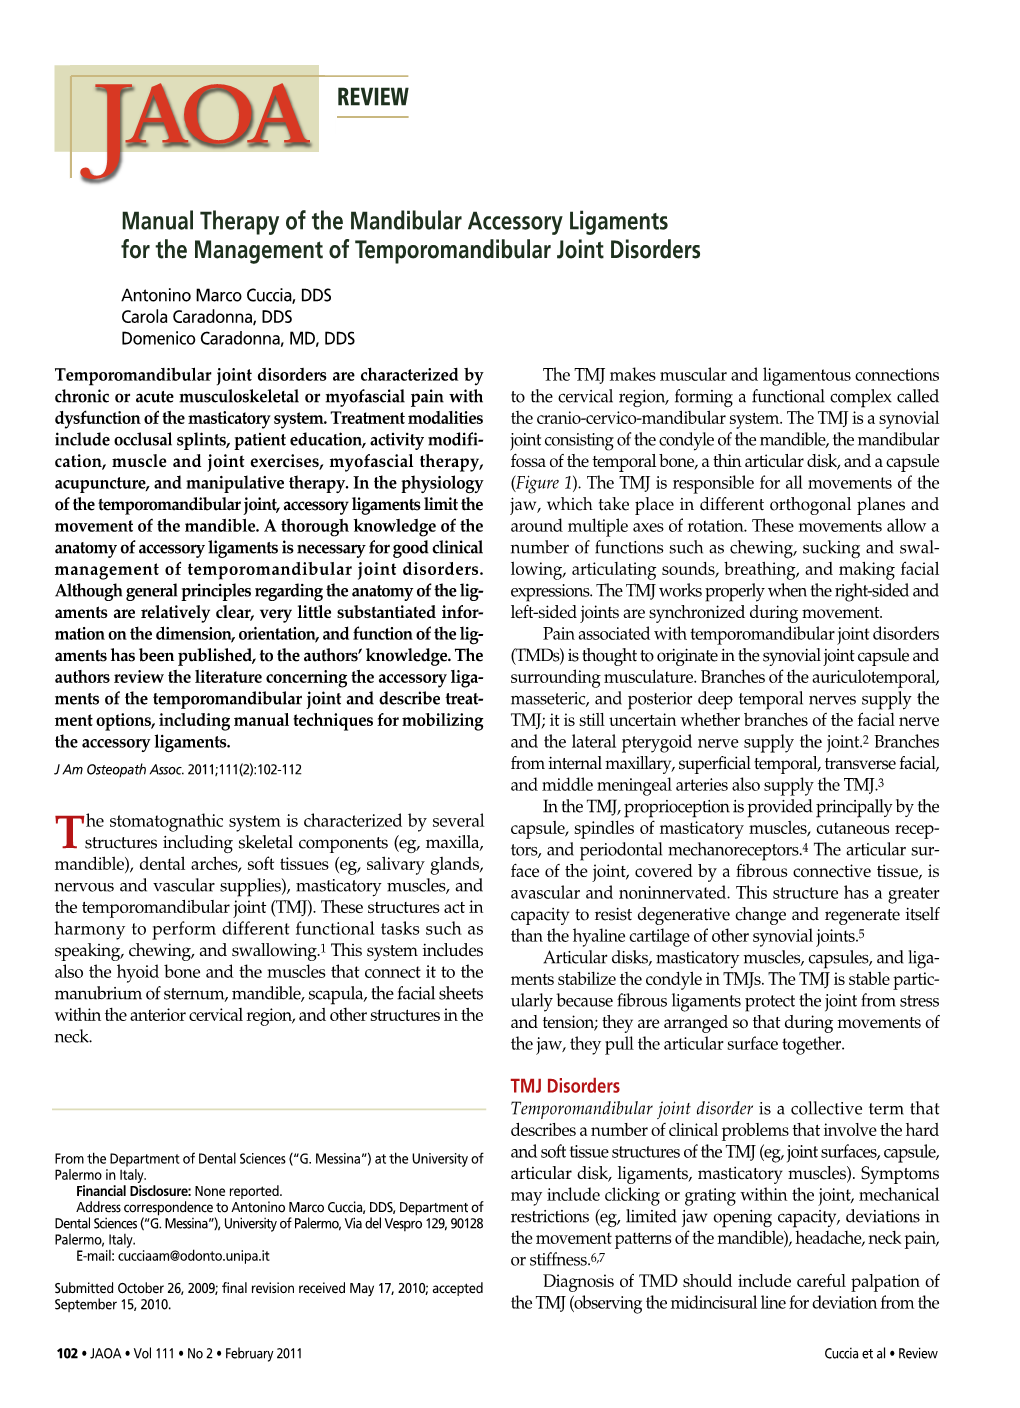 Manual Therapy of the Mandibular Accessory Ligaments for the Management of Temporomandibular Joint Disorders